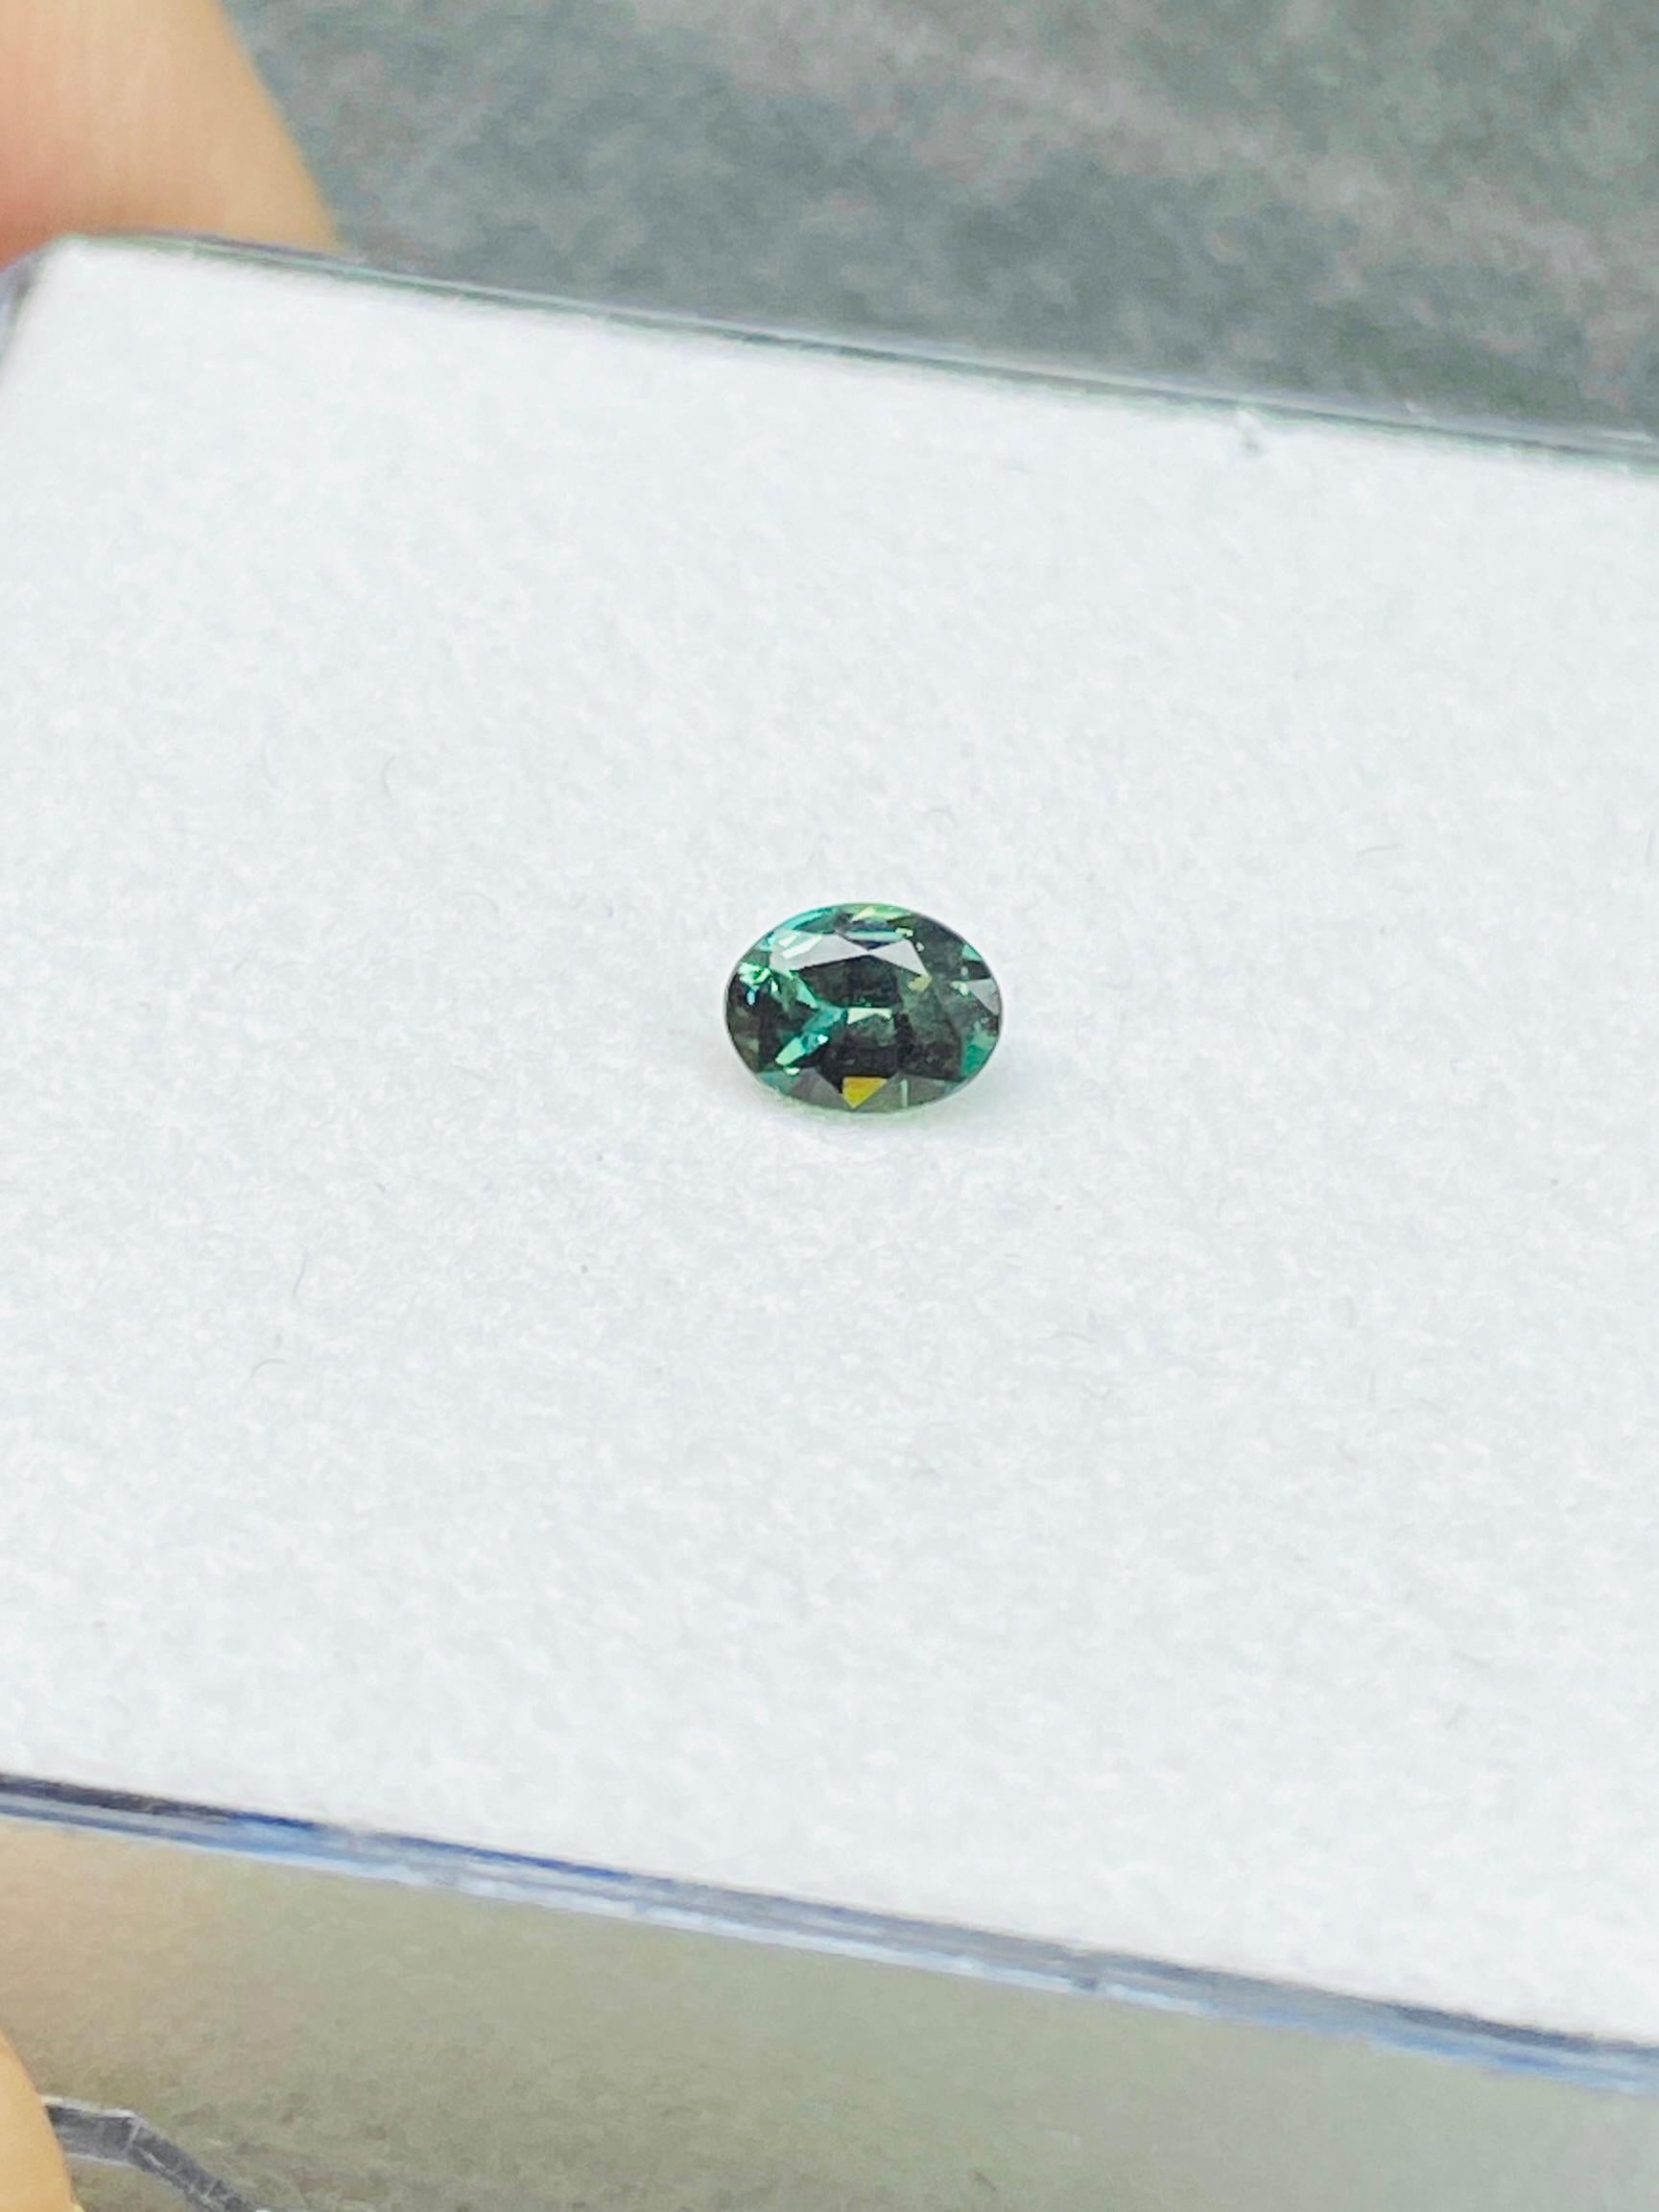 Top Alexandrite 0.22ct deep green to pinkish red color change rare gemstone 

Weight: 0.22ct
Size: 4.5*3.5*2.2mm
Srilanka 
Deep Green to pinkish red
Eye clean 
